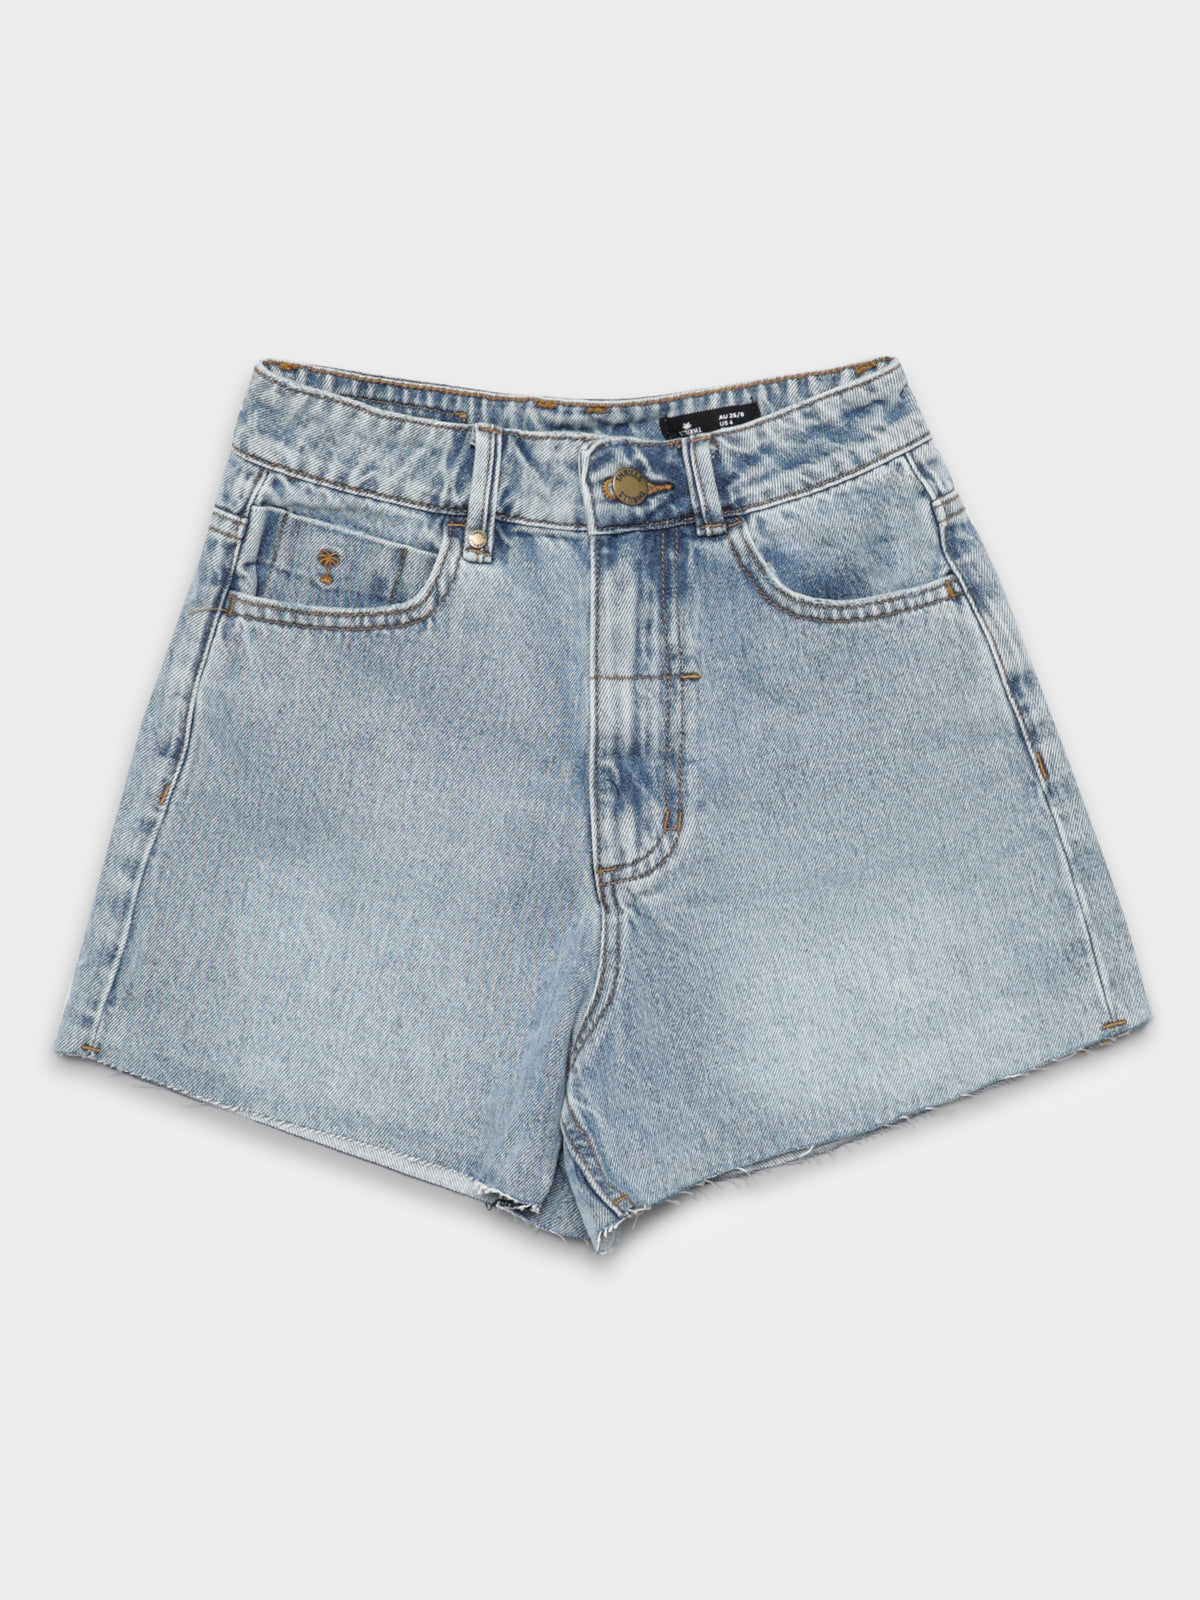 Erica Shorts in Aged Blue